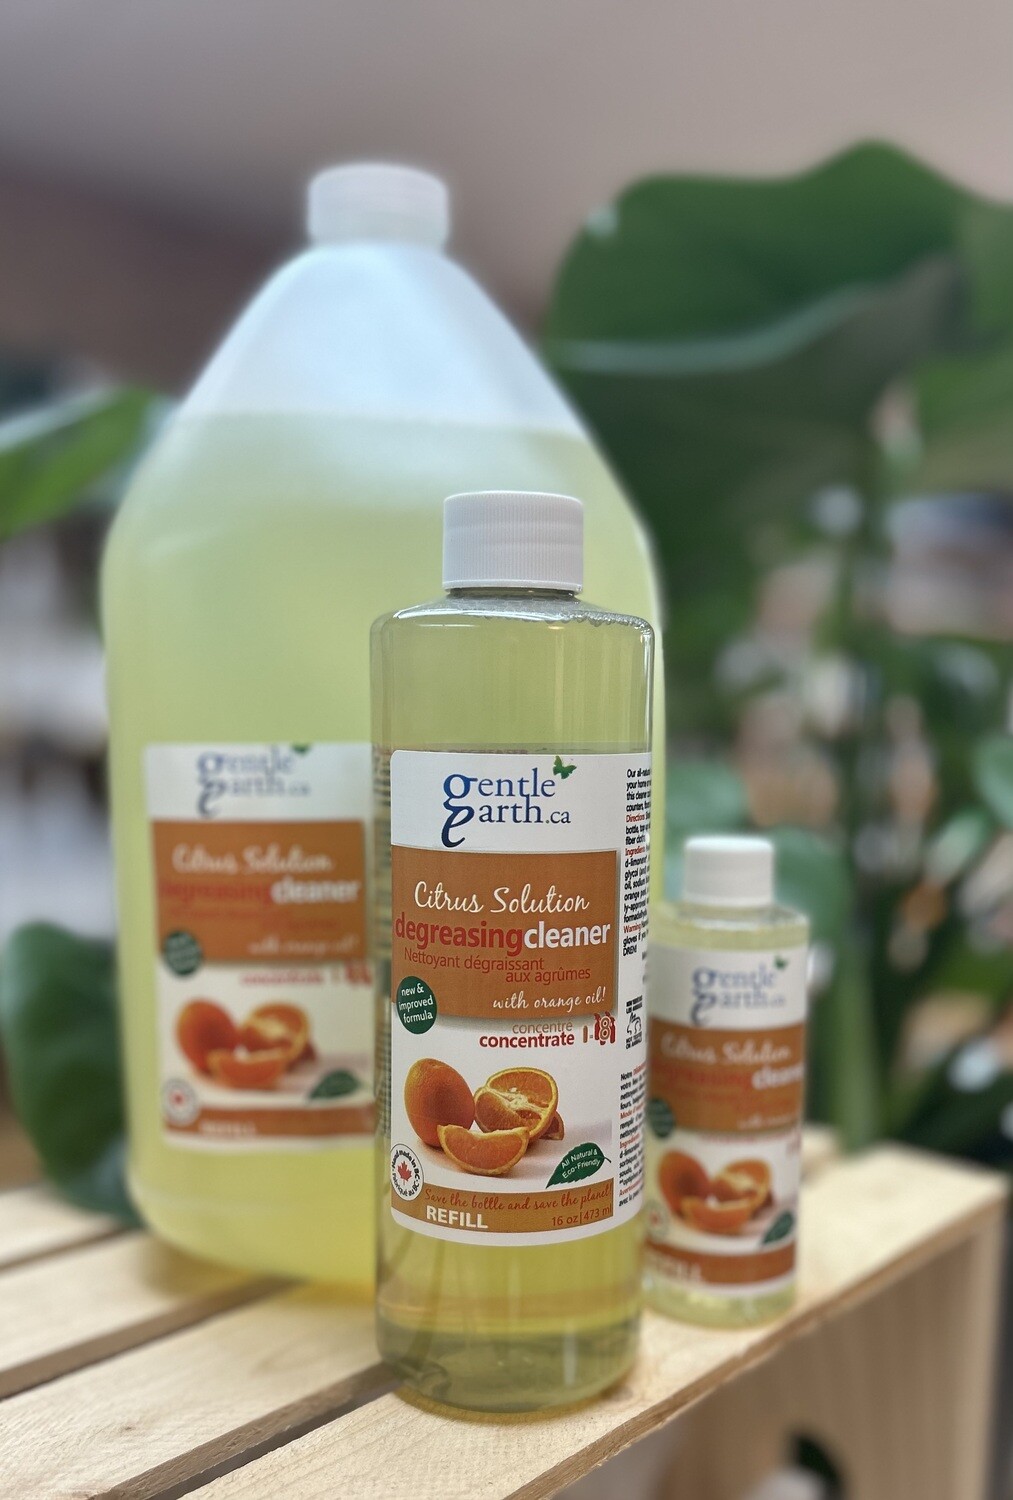 Gentle Earth - Citrus Solution Degreasing Cleaner